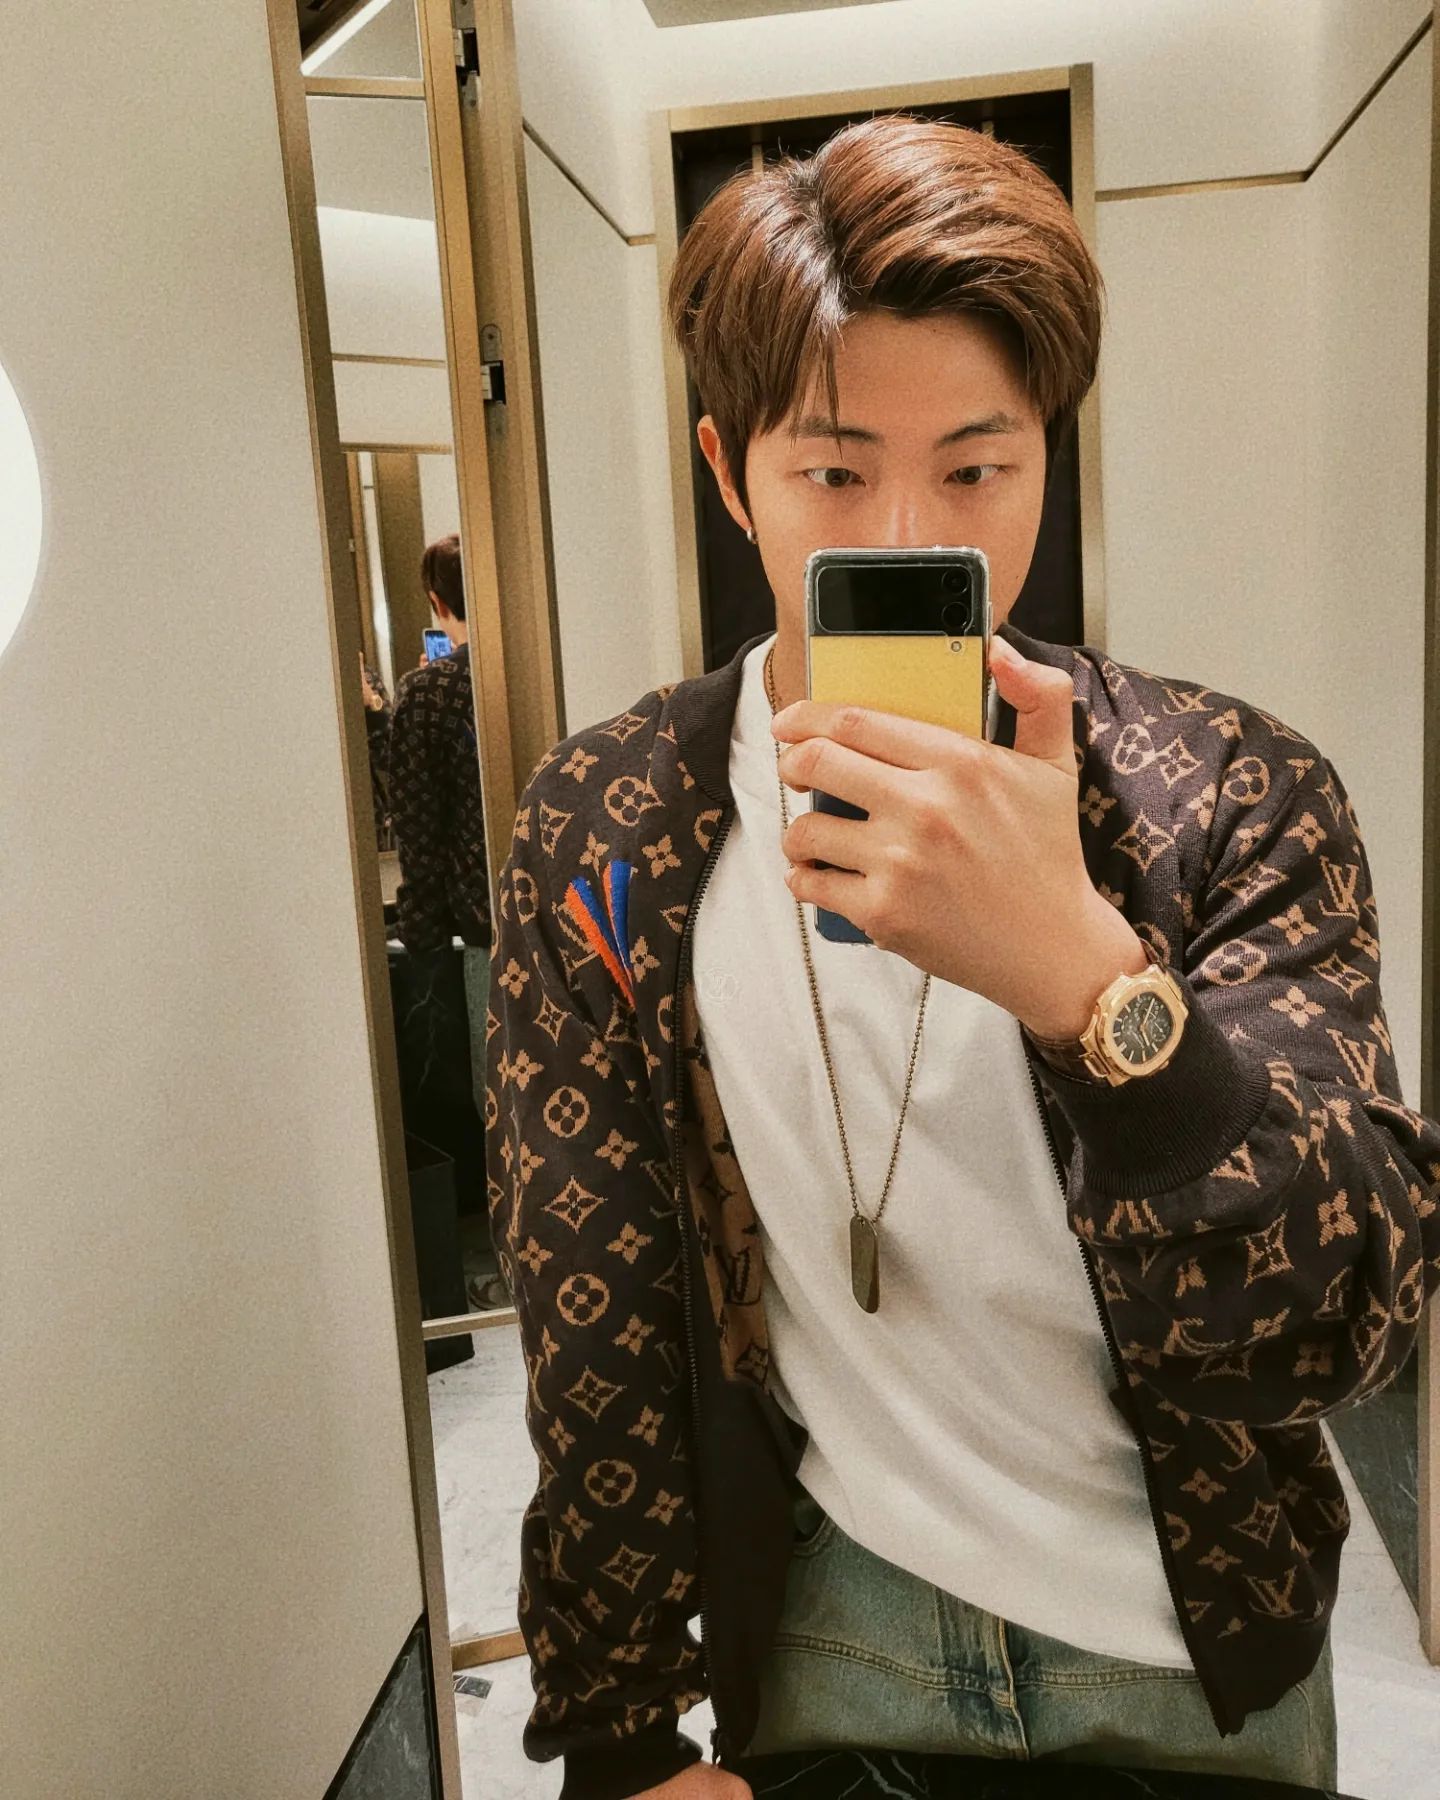 Clout News on X: .@BTS_twt's NAMJOON is dashing in newly shared